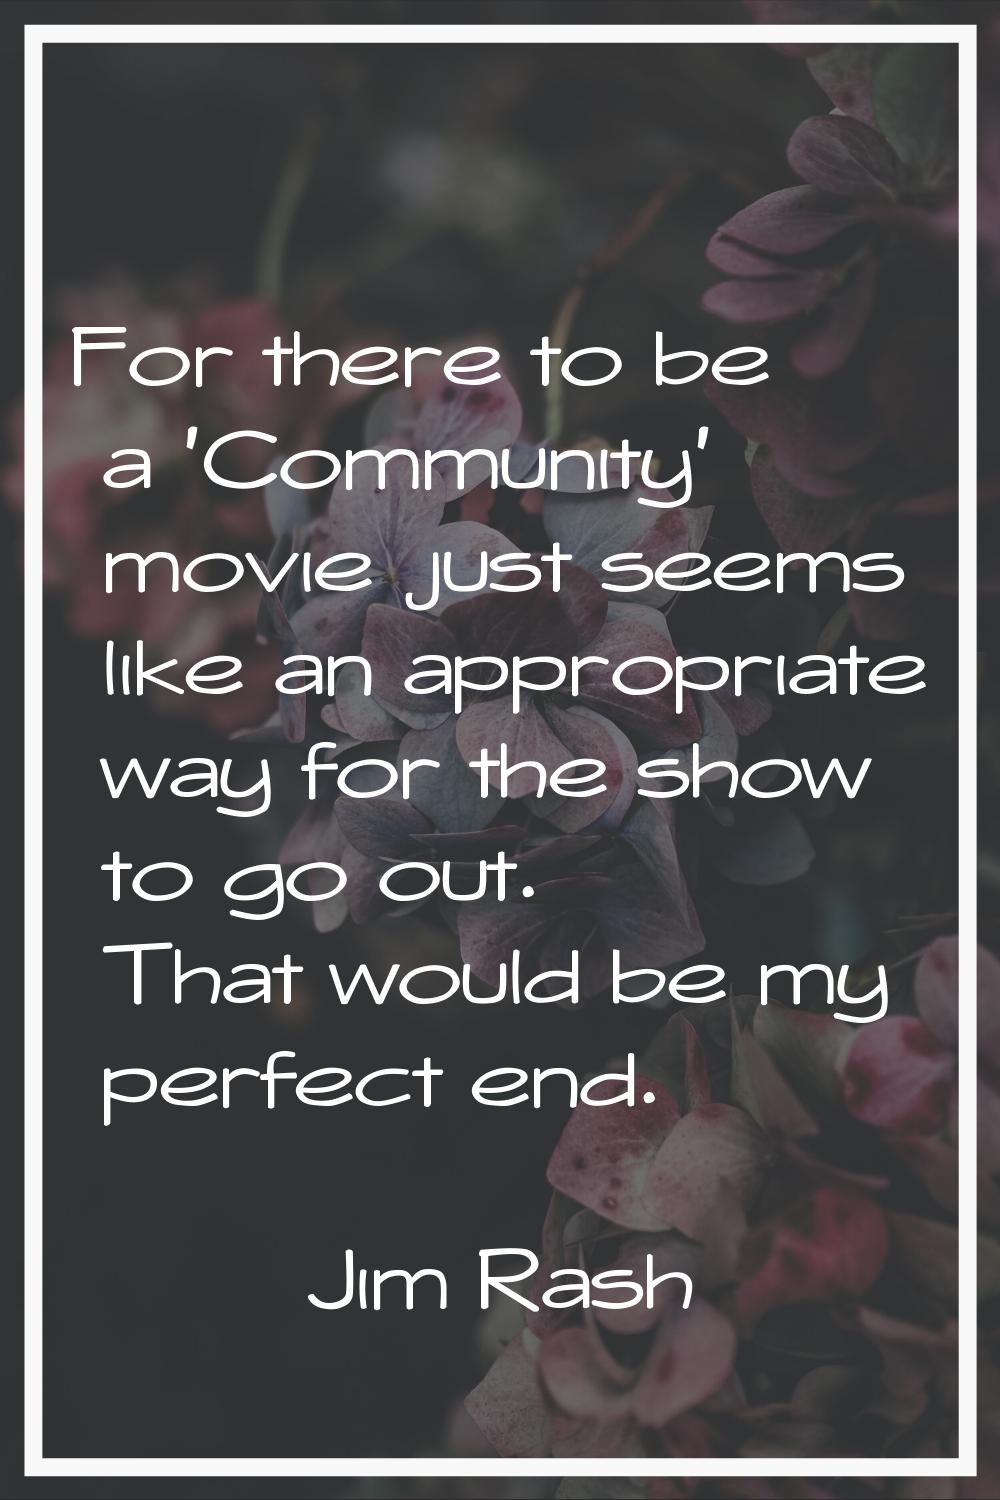 For there to be a 'Community' movie just seems like an appropriate way for the show to go out. That